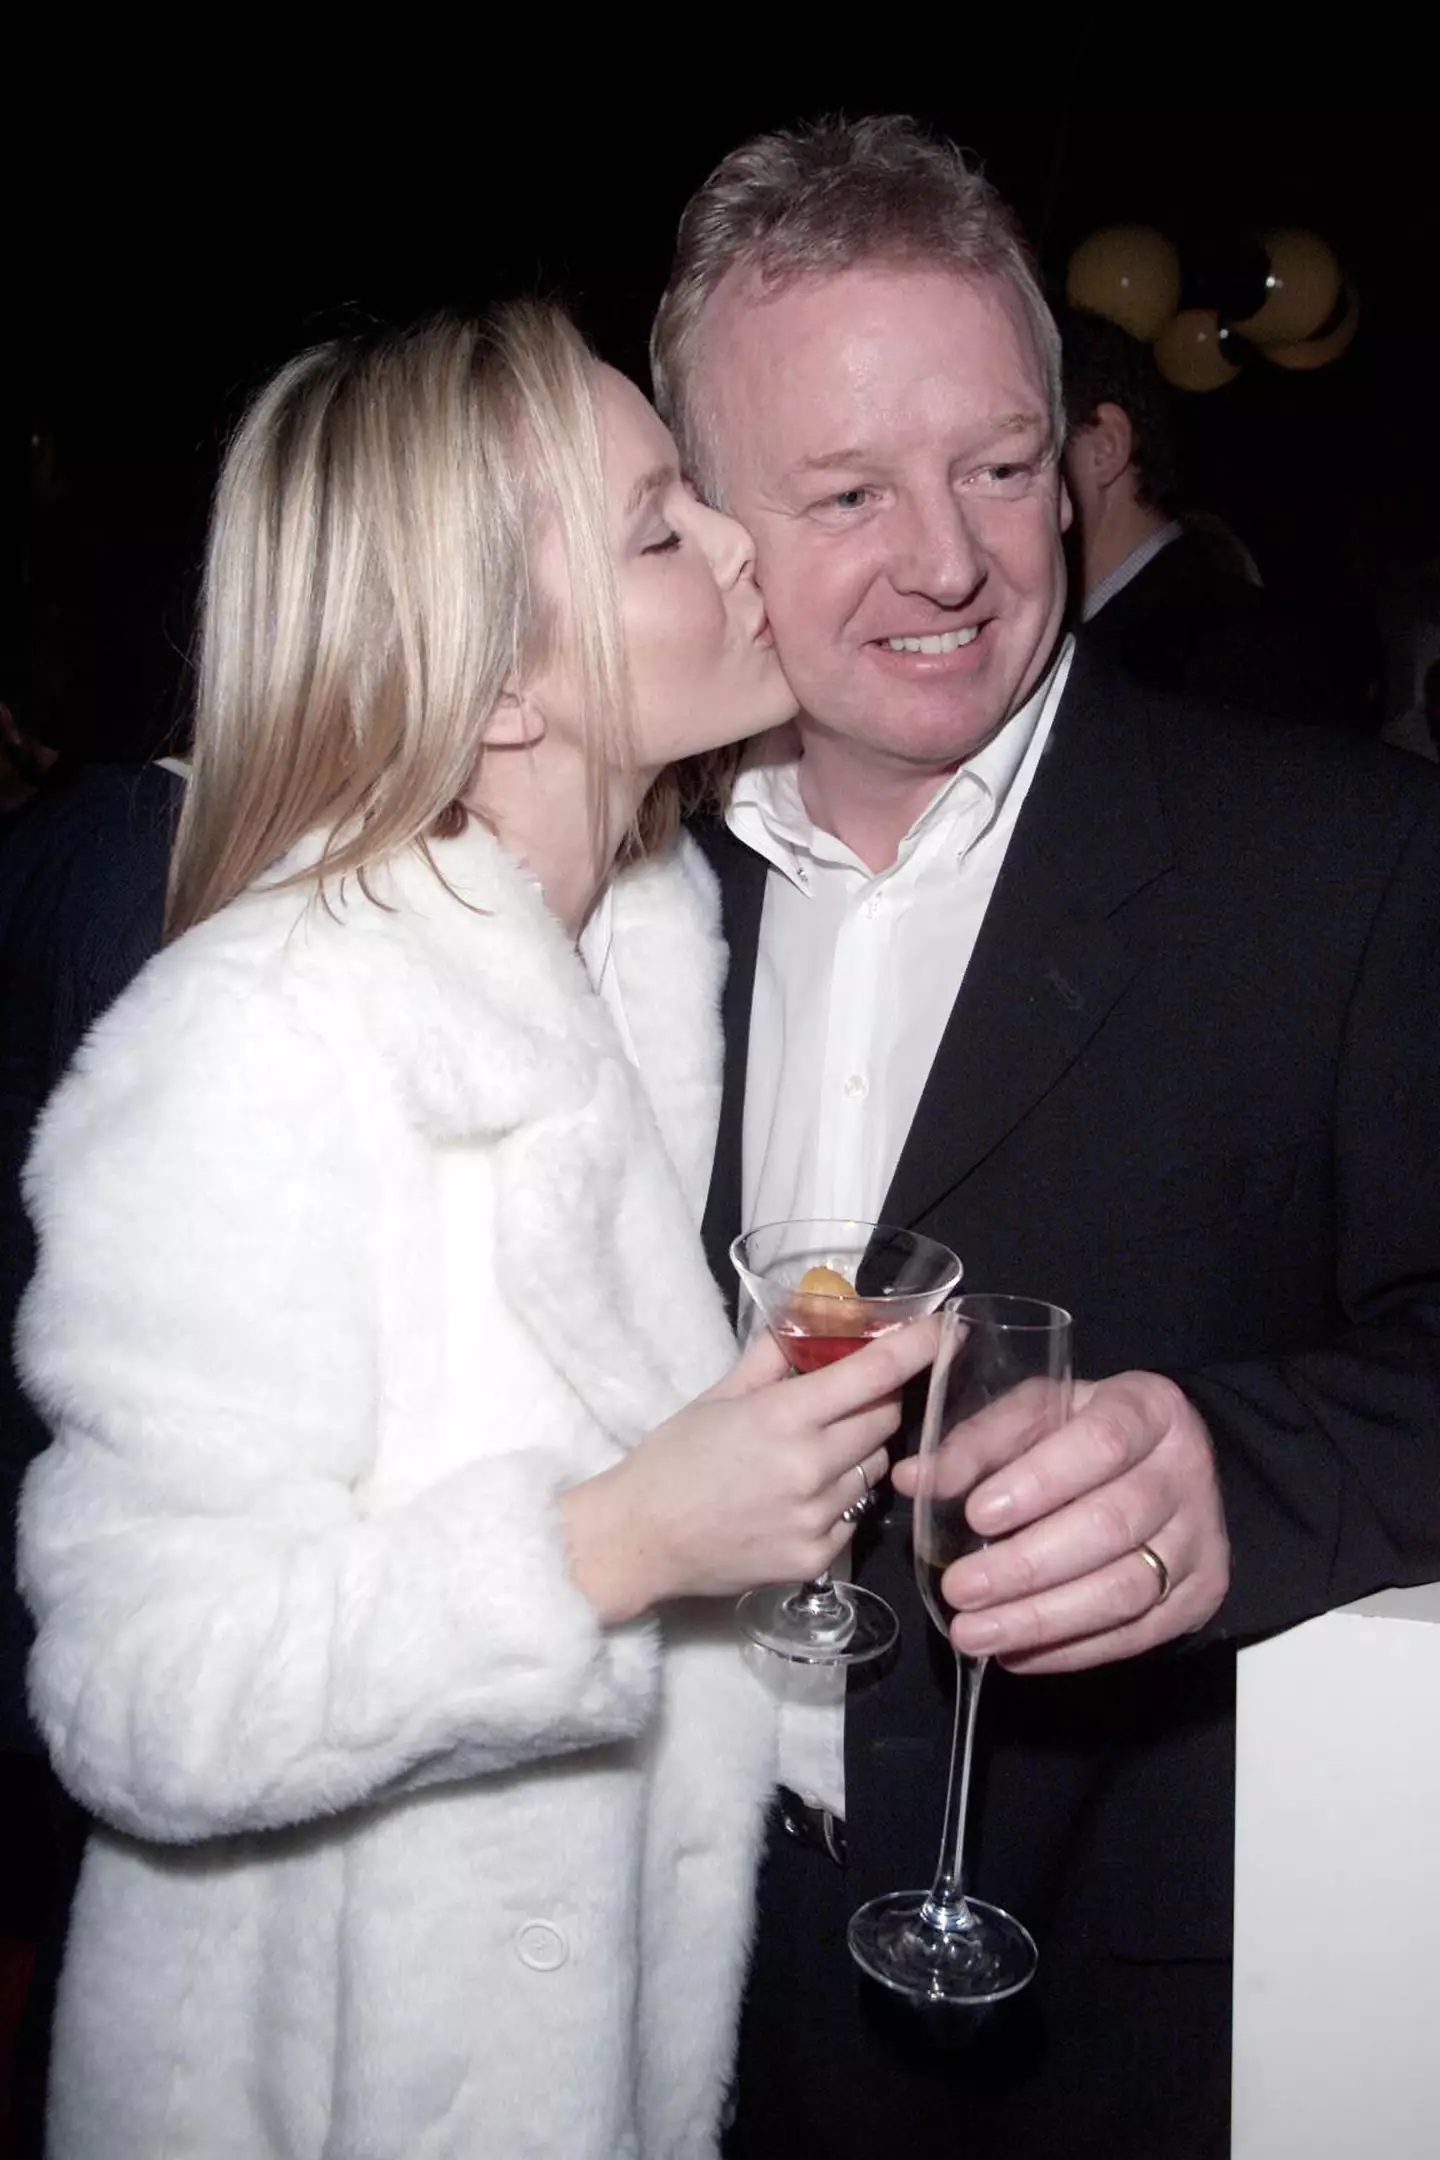 Les Dennis and Amanda Holden got divorced after eight years (Dave Hogan/Getty Images)